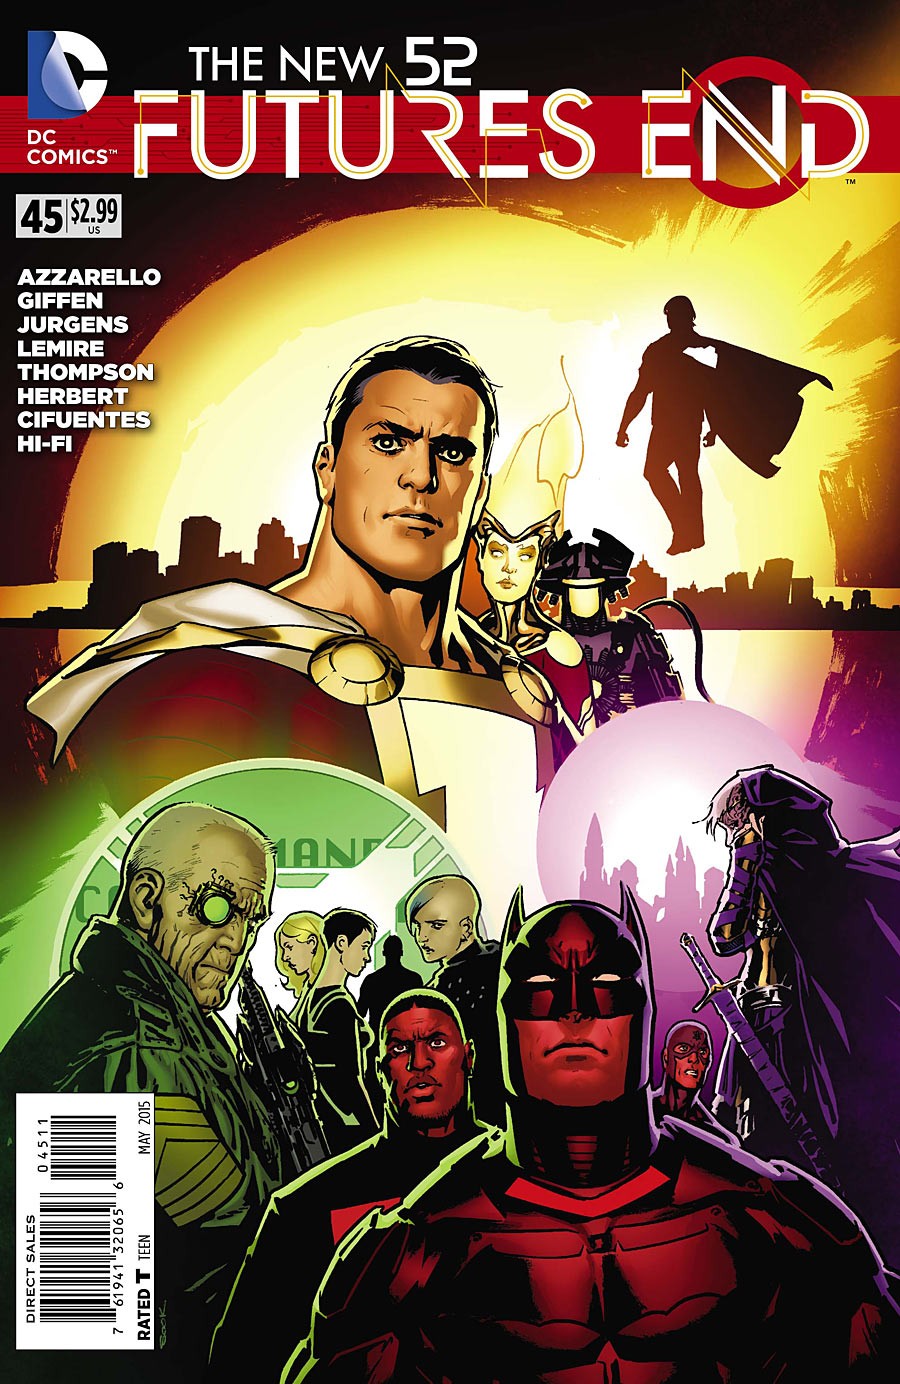 The New 52: Futures End Vol. 1 #45